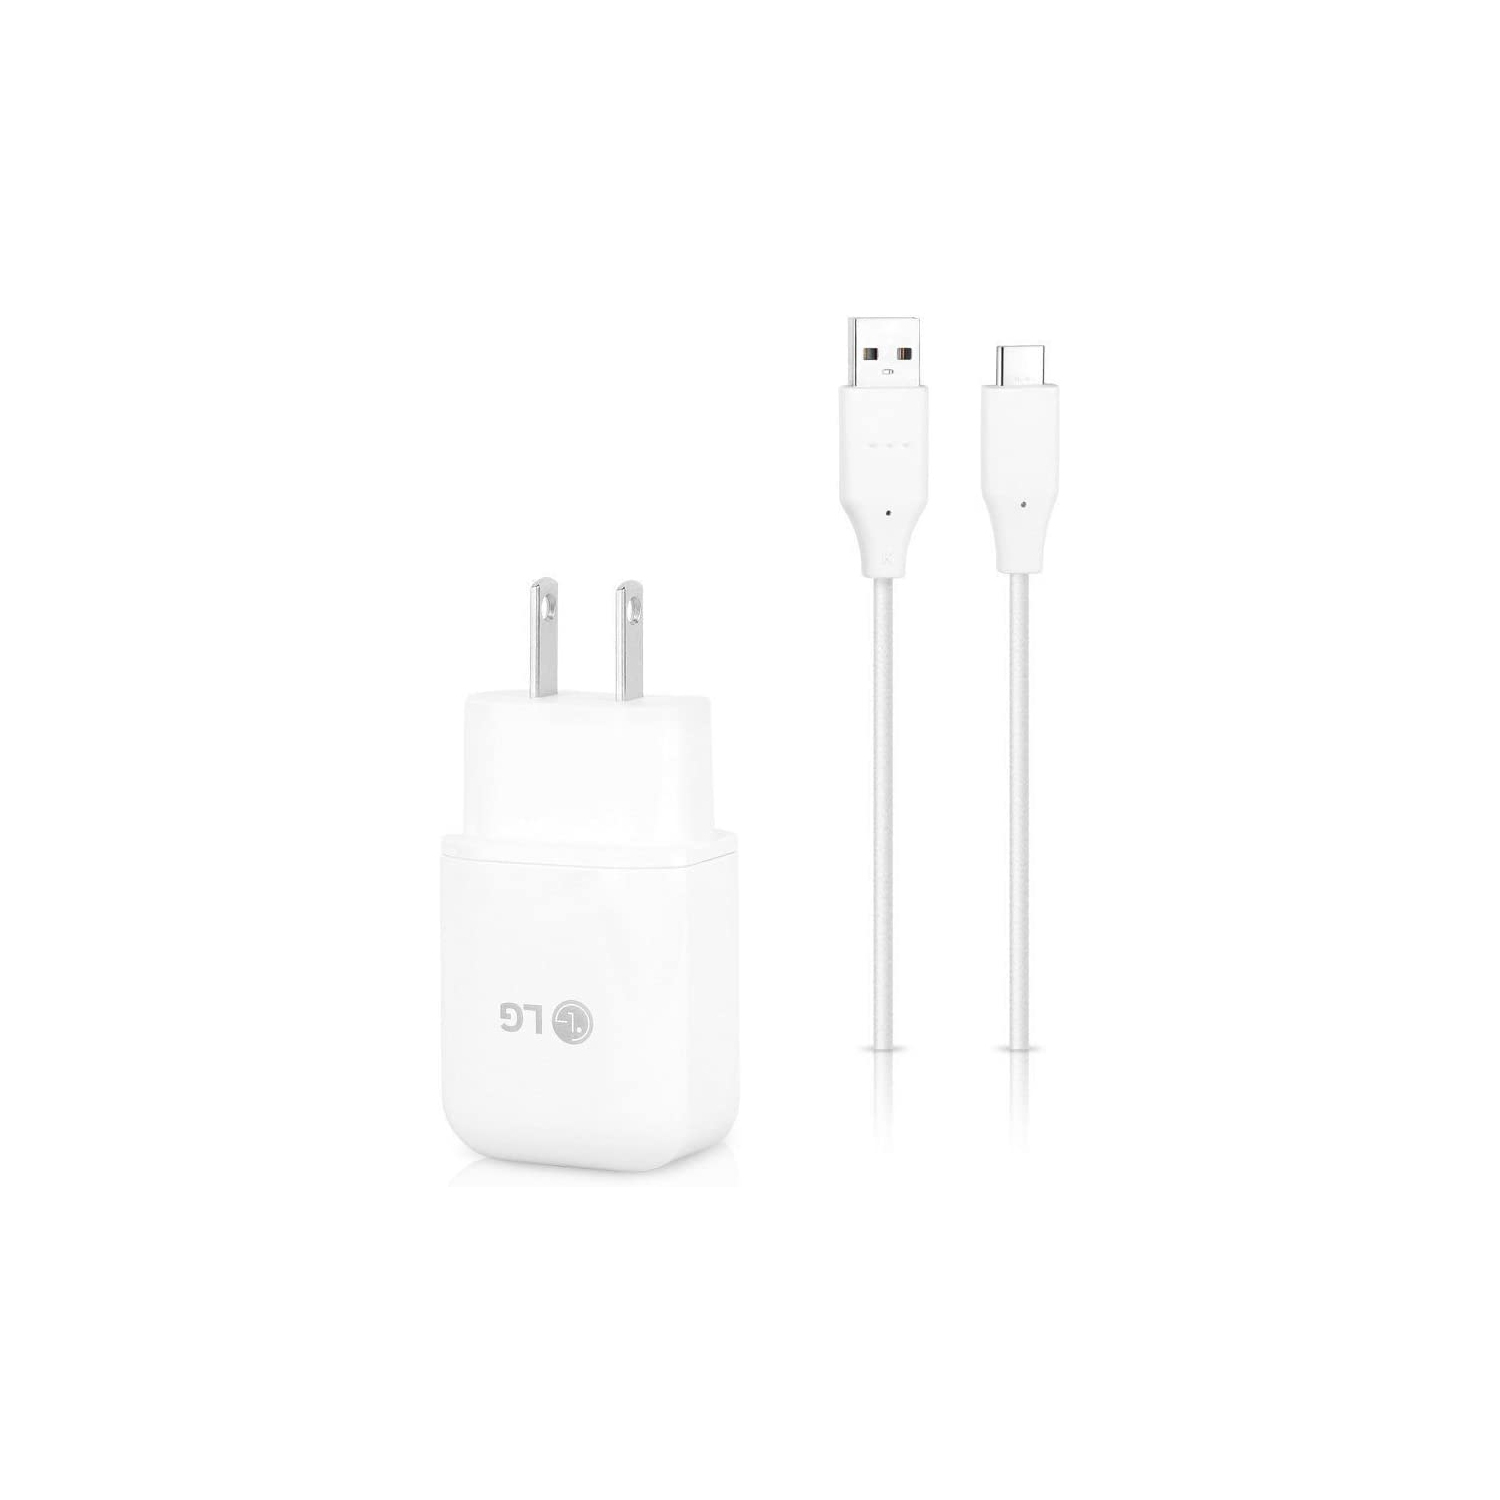 (2pack) LG Fast Charger with USB Type-C Cable Quick Charge for LG G5 G6 G7 ThinQ V30 V40 V20 Stylo 4 V35 ThinQ - WHITE